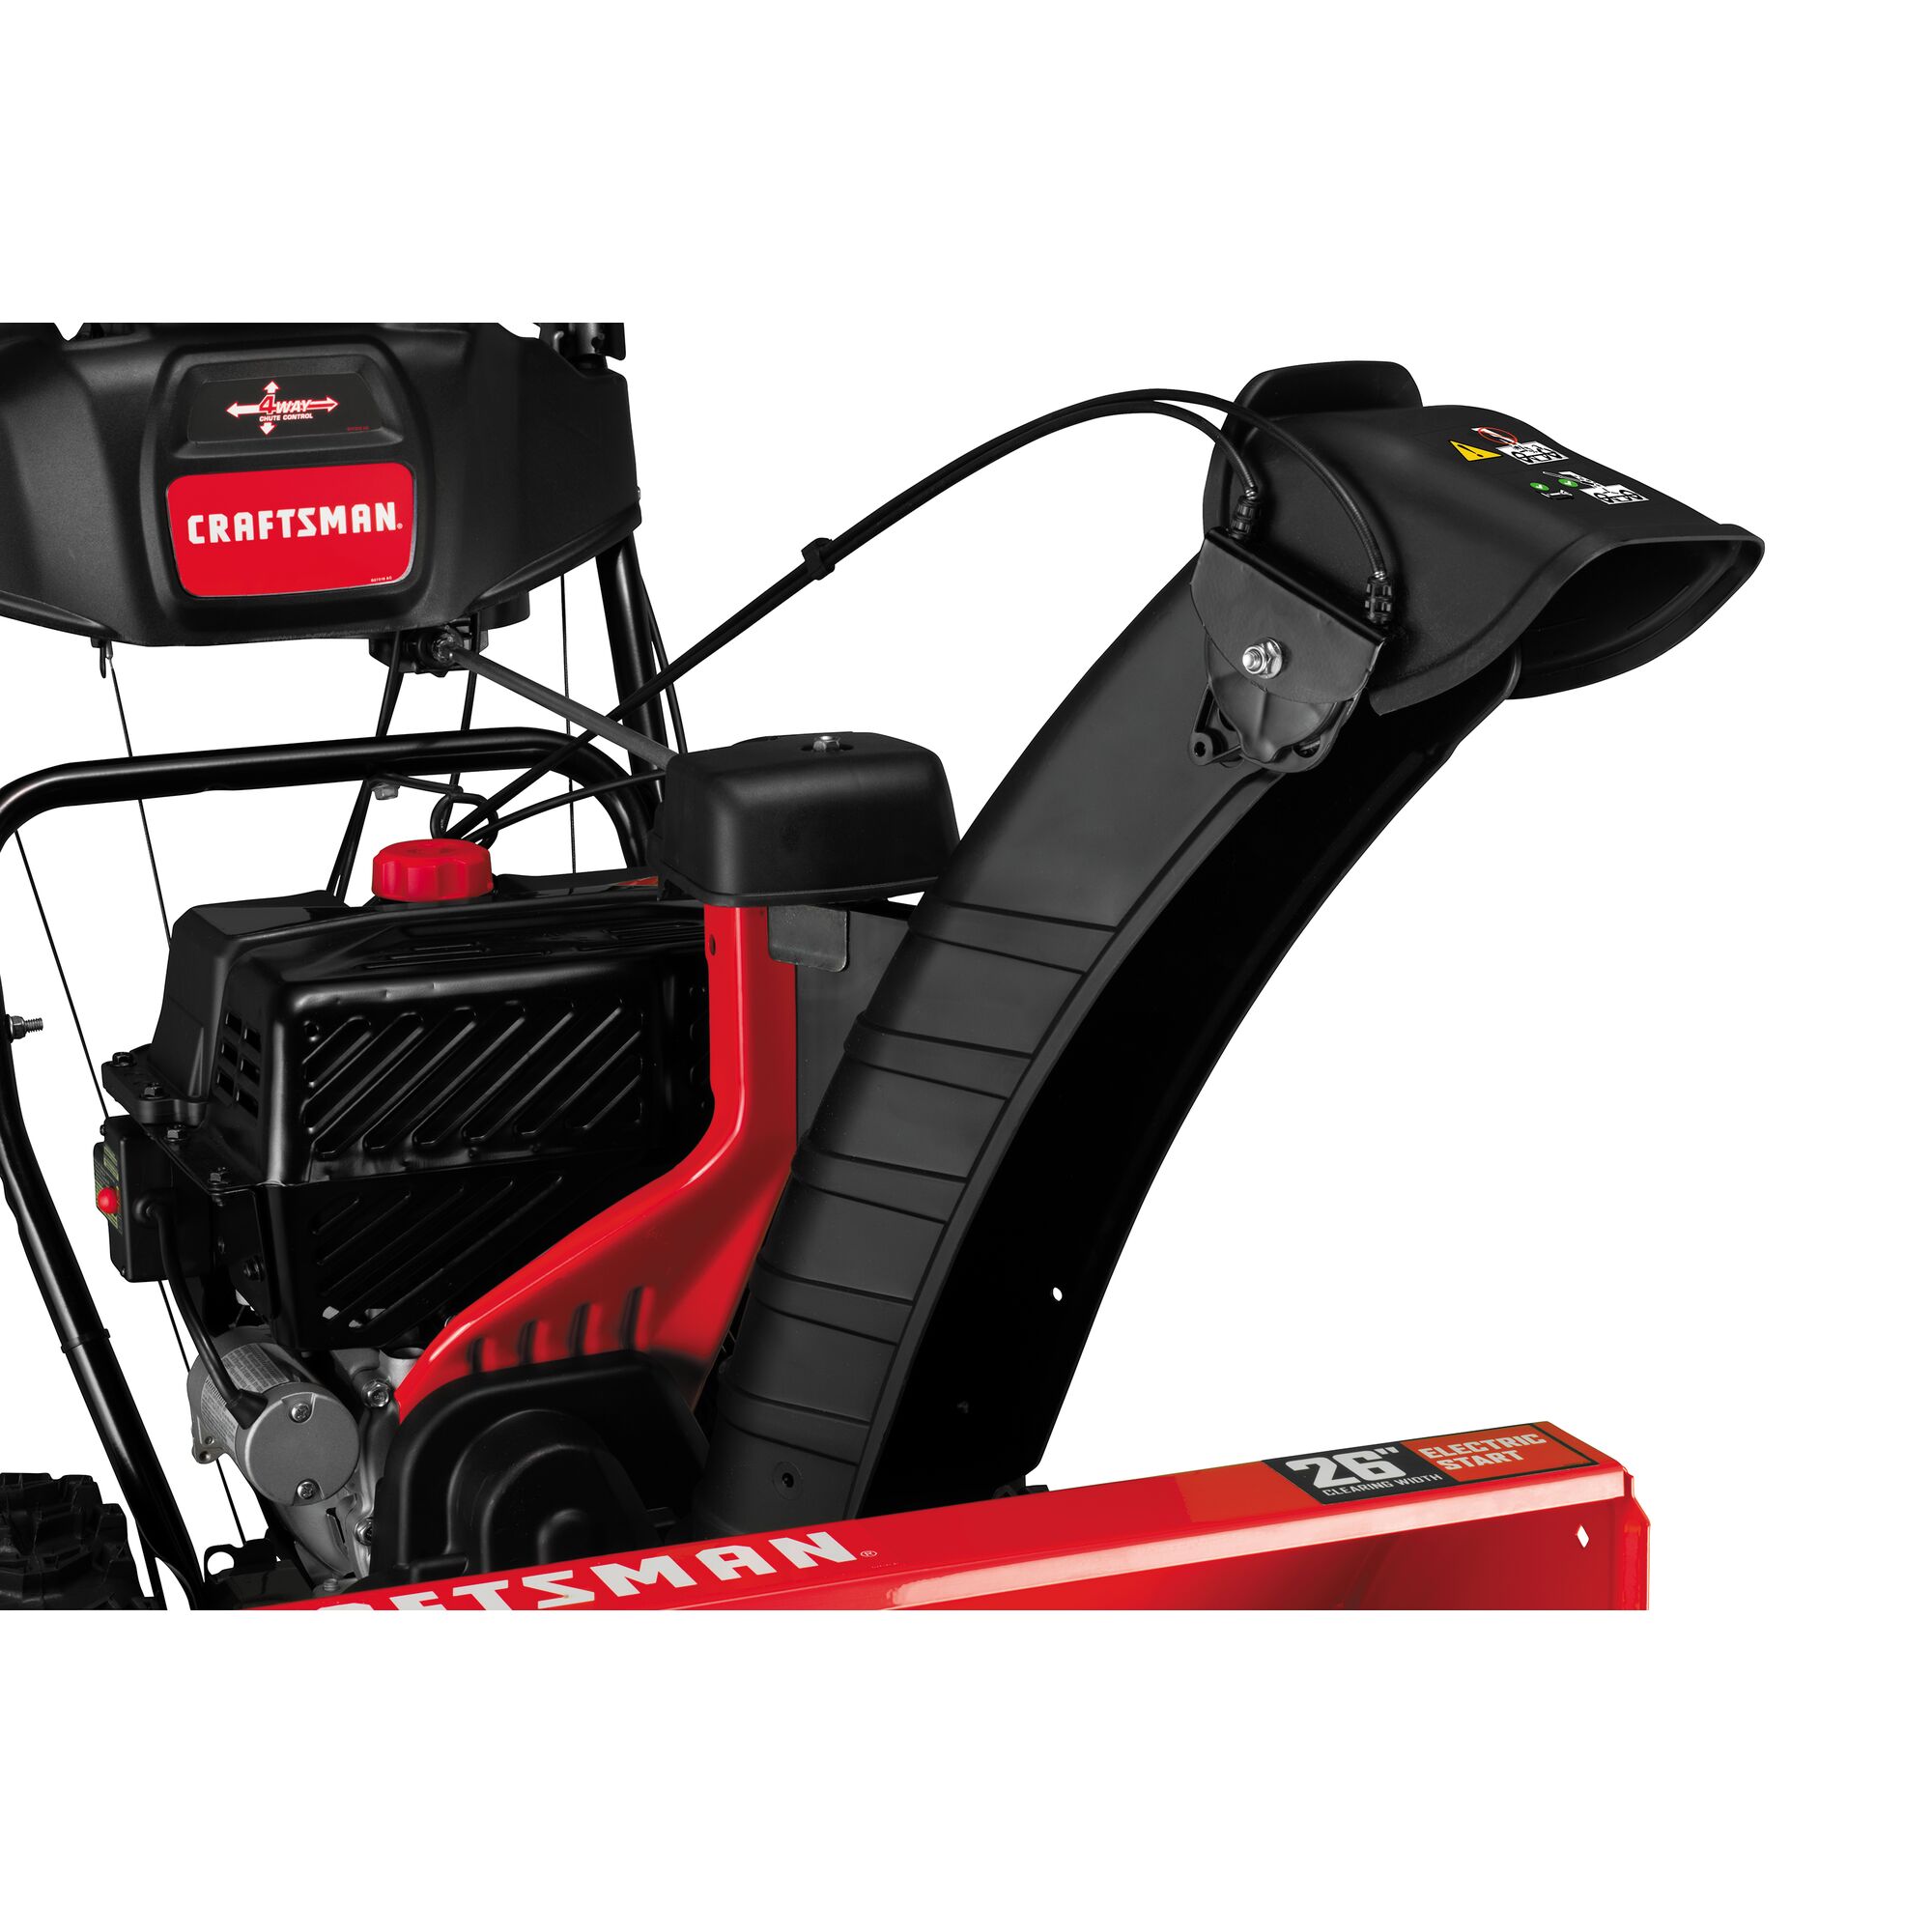 Extended chute control feature in 28 inch 357CC two stage self propelled gas snow blower with E F I and E G O V engine.